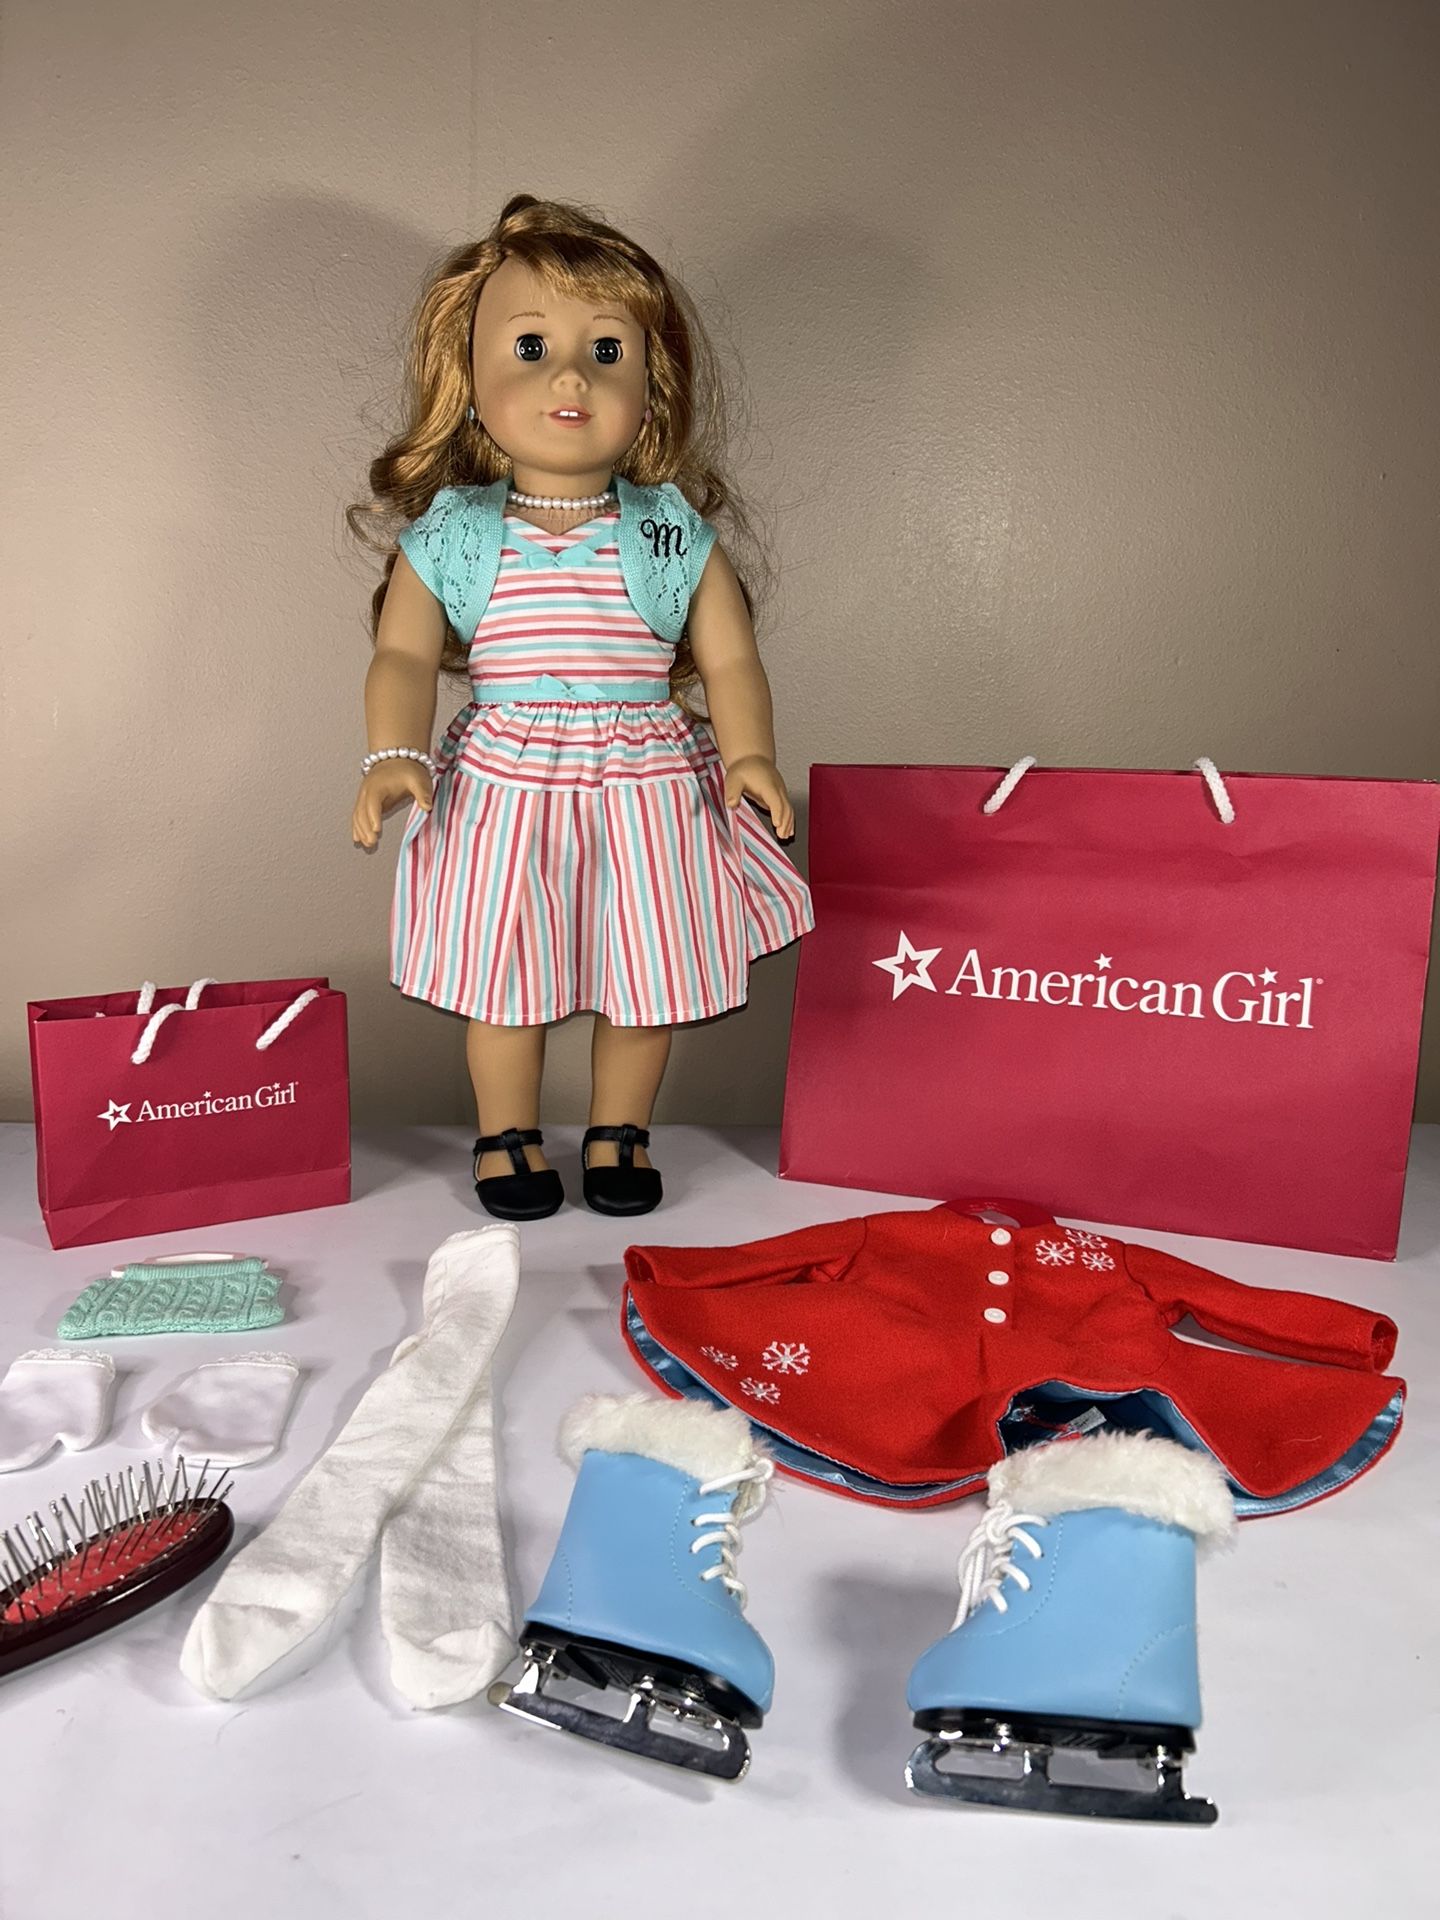 American Girl 18” “Maryellen”Doll, Meet Outfit, Accessories & Ice Skating Outfit